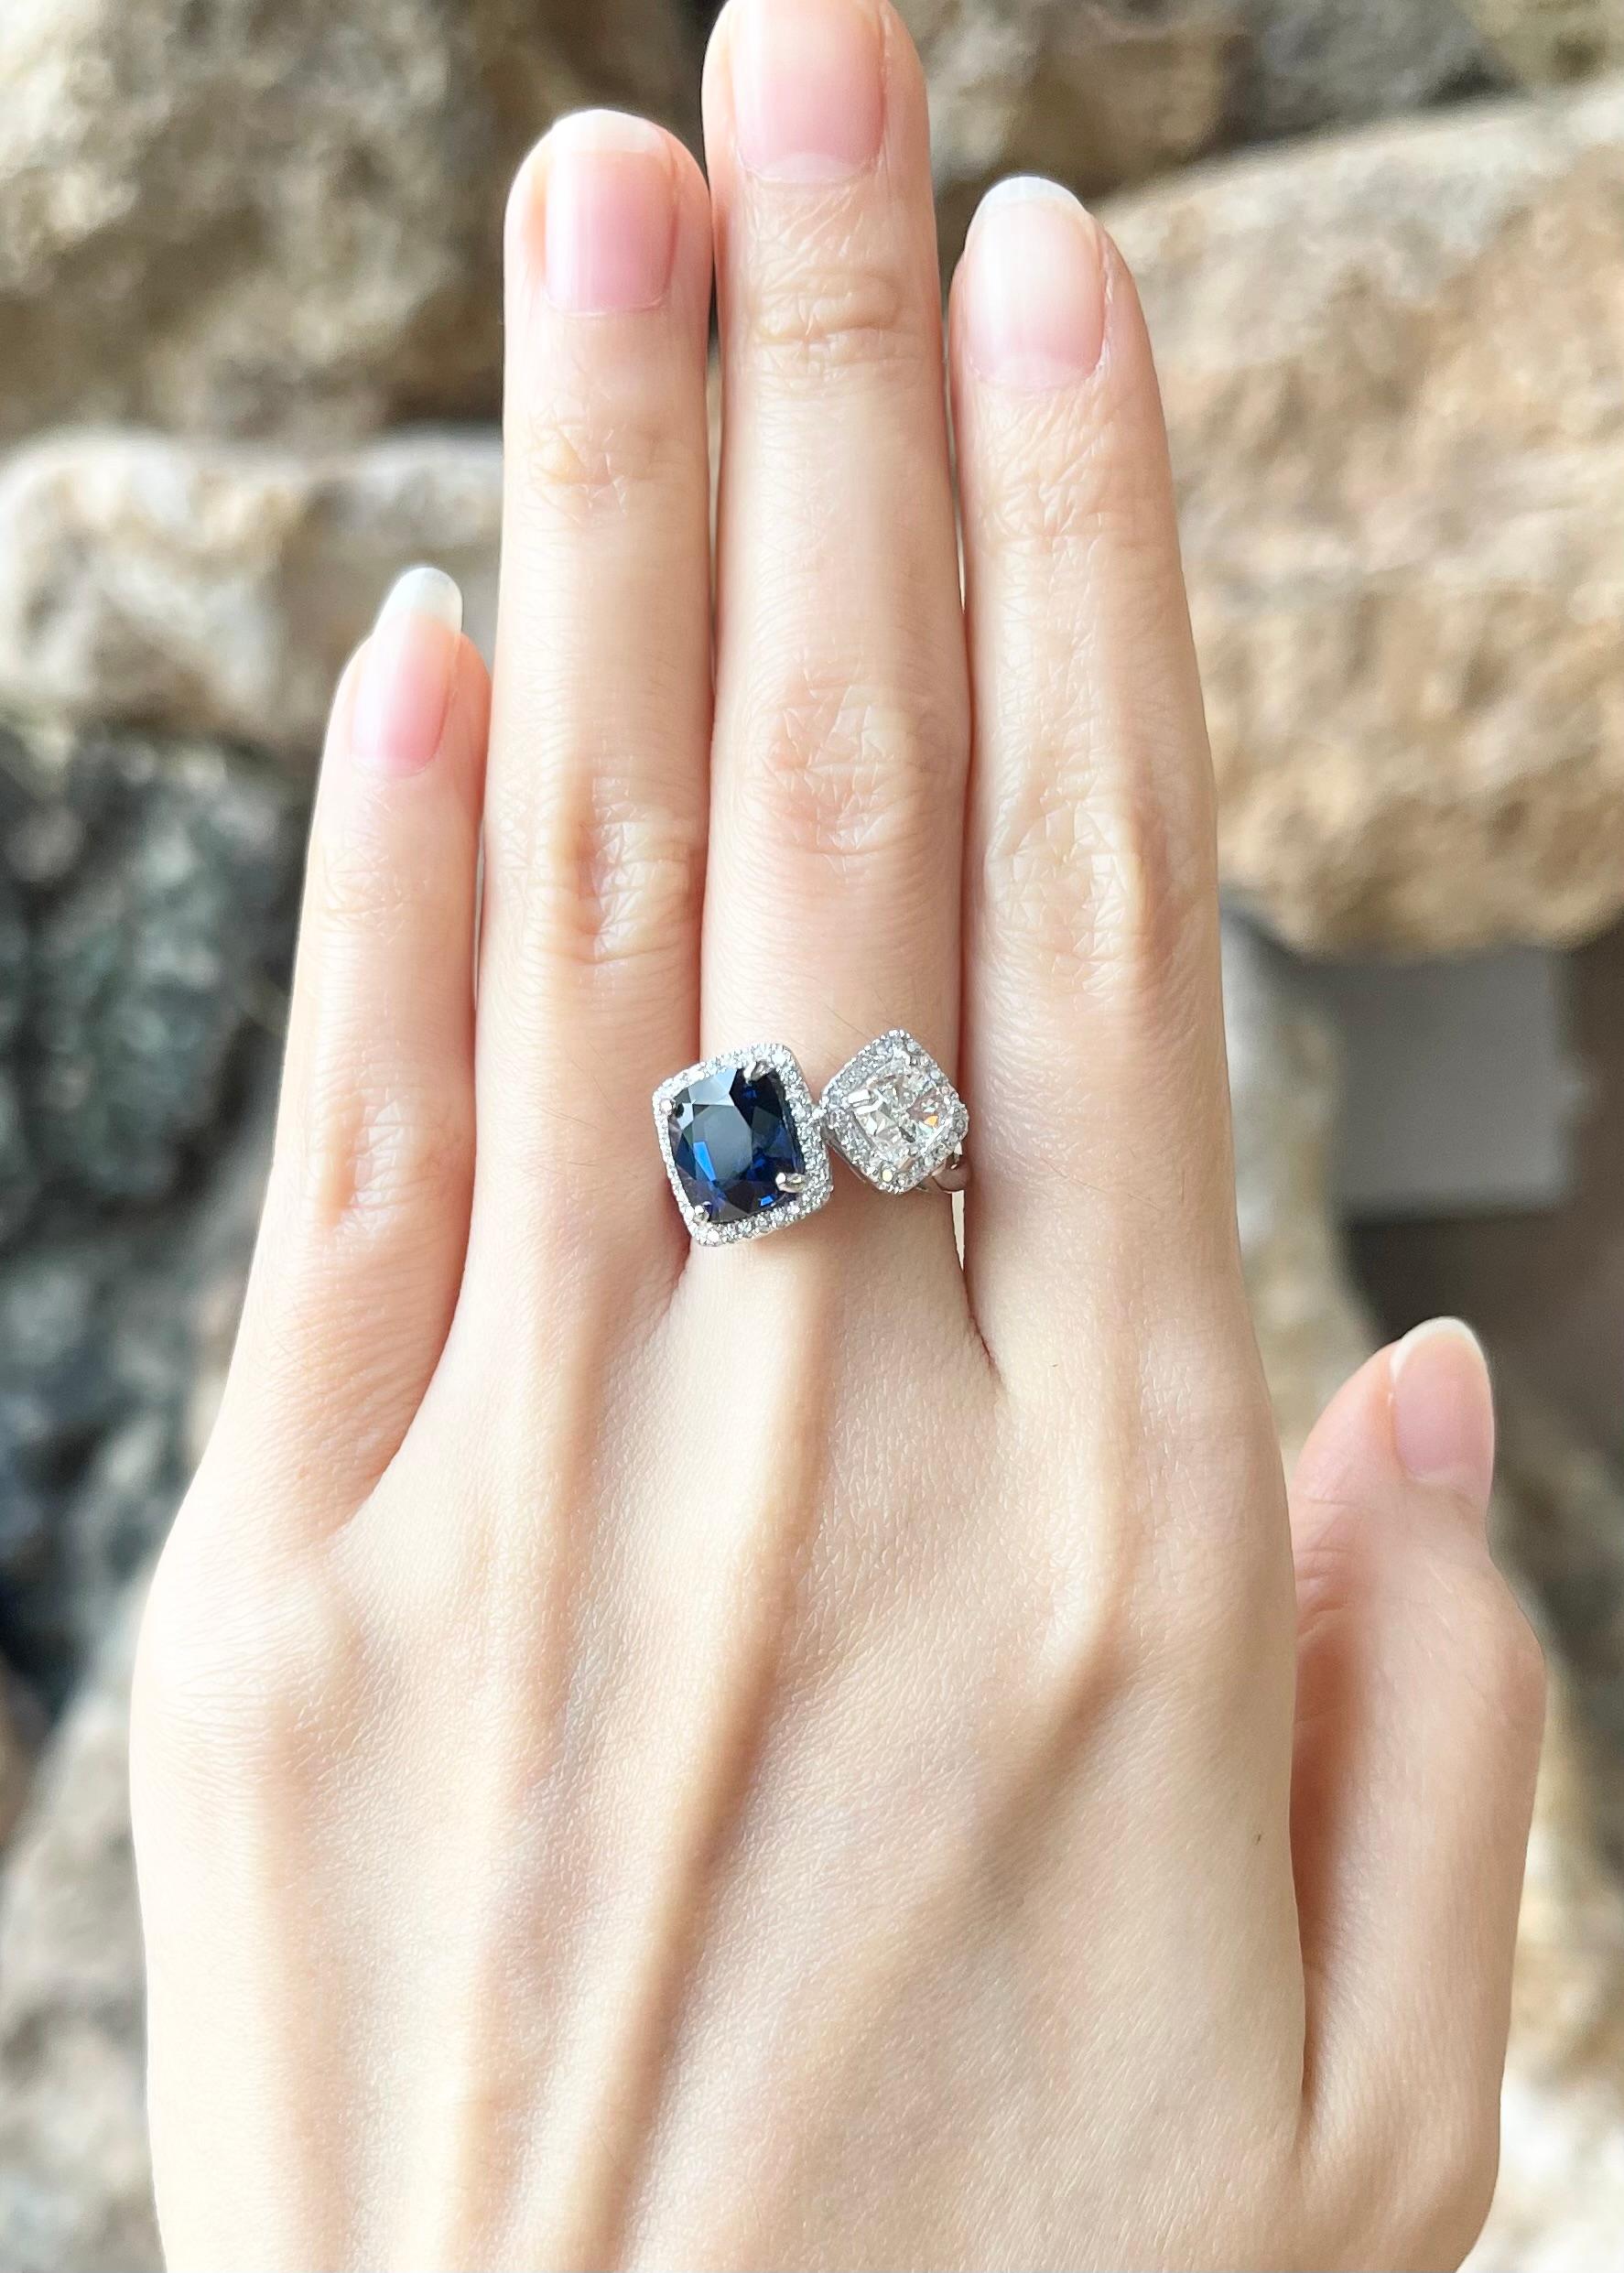 Blue Sapphire 3.81 carats, Diamond 1.20 carats and Diamond 0.29 carats Ring set in 18K White Gold Settings

Width:  1.9 cm 
Length: 1.1 cm
Ring Size: 51
Total Weight: 5.36 grams

